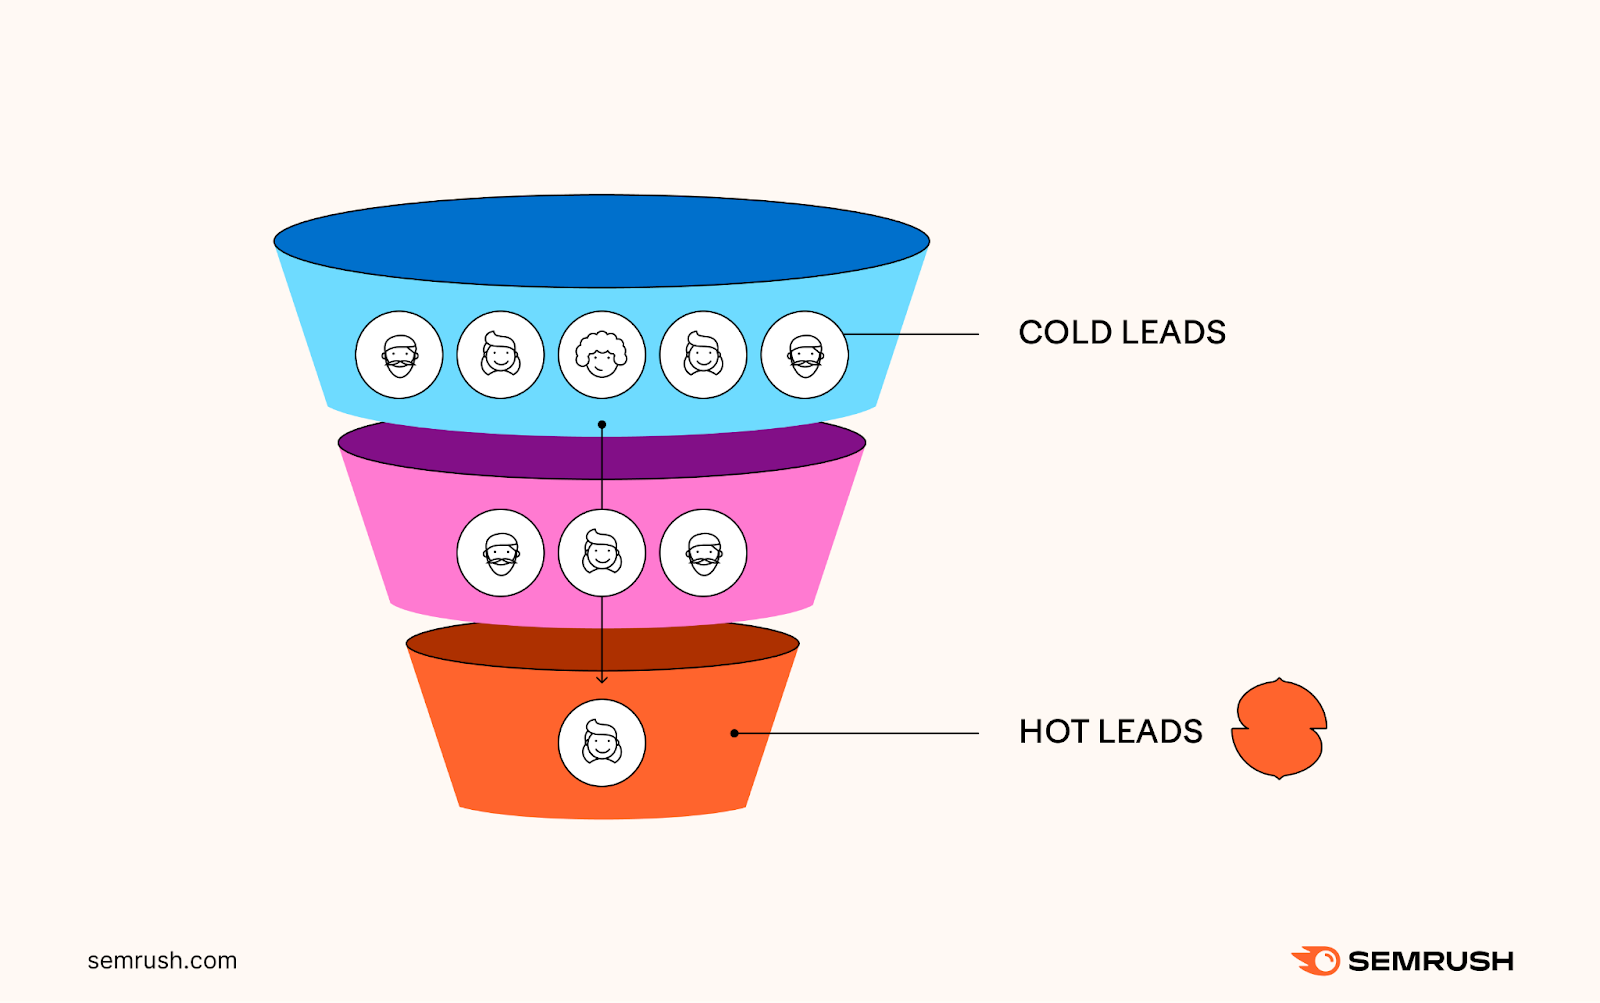 An illustration of a leads funnel showing cold leads at the top, and hot leads at the bottom